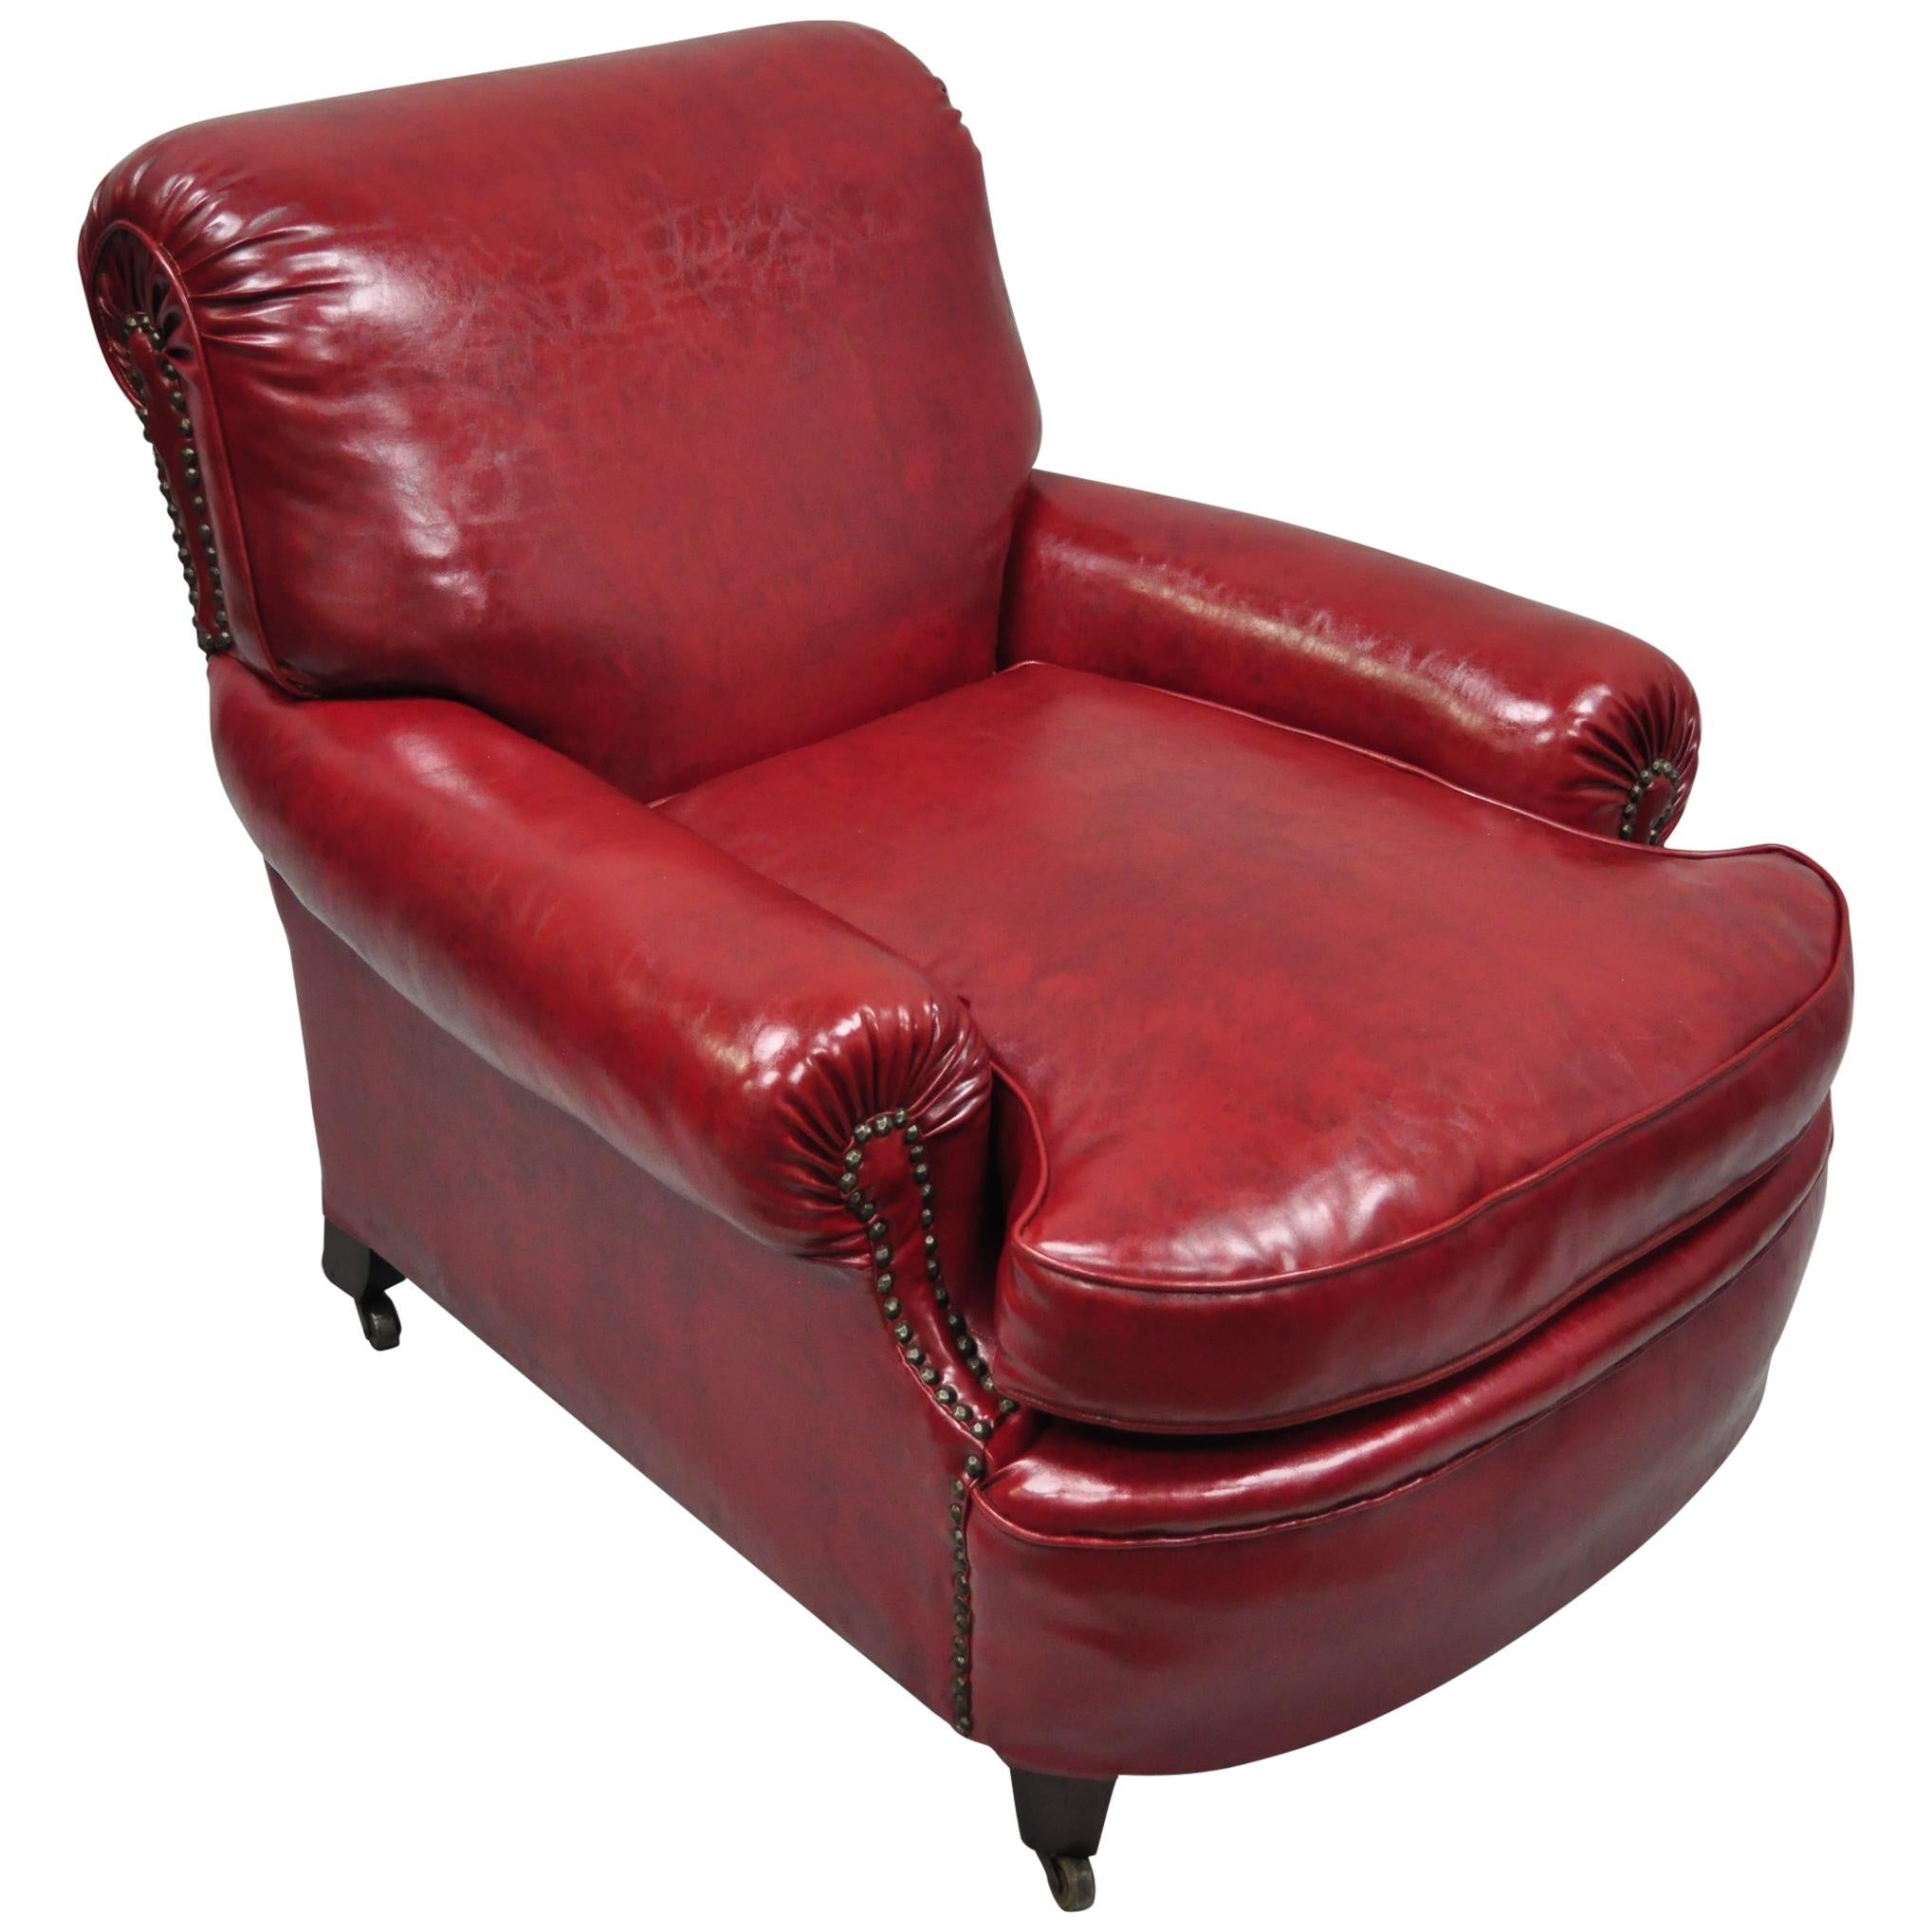 Antique English Regency Style Burgundy Red Vinyl Faux Leather Club Lounge Chair